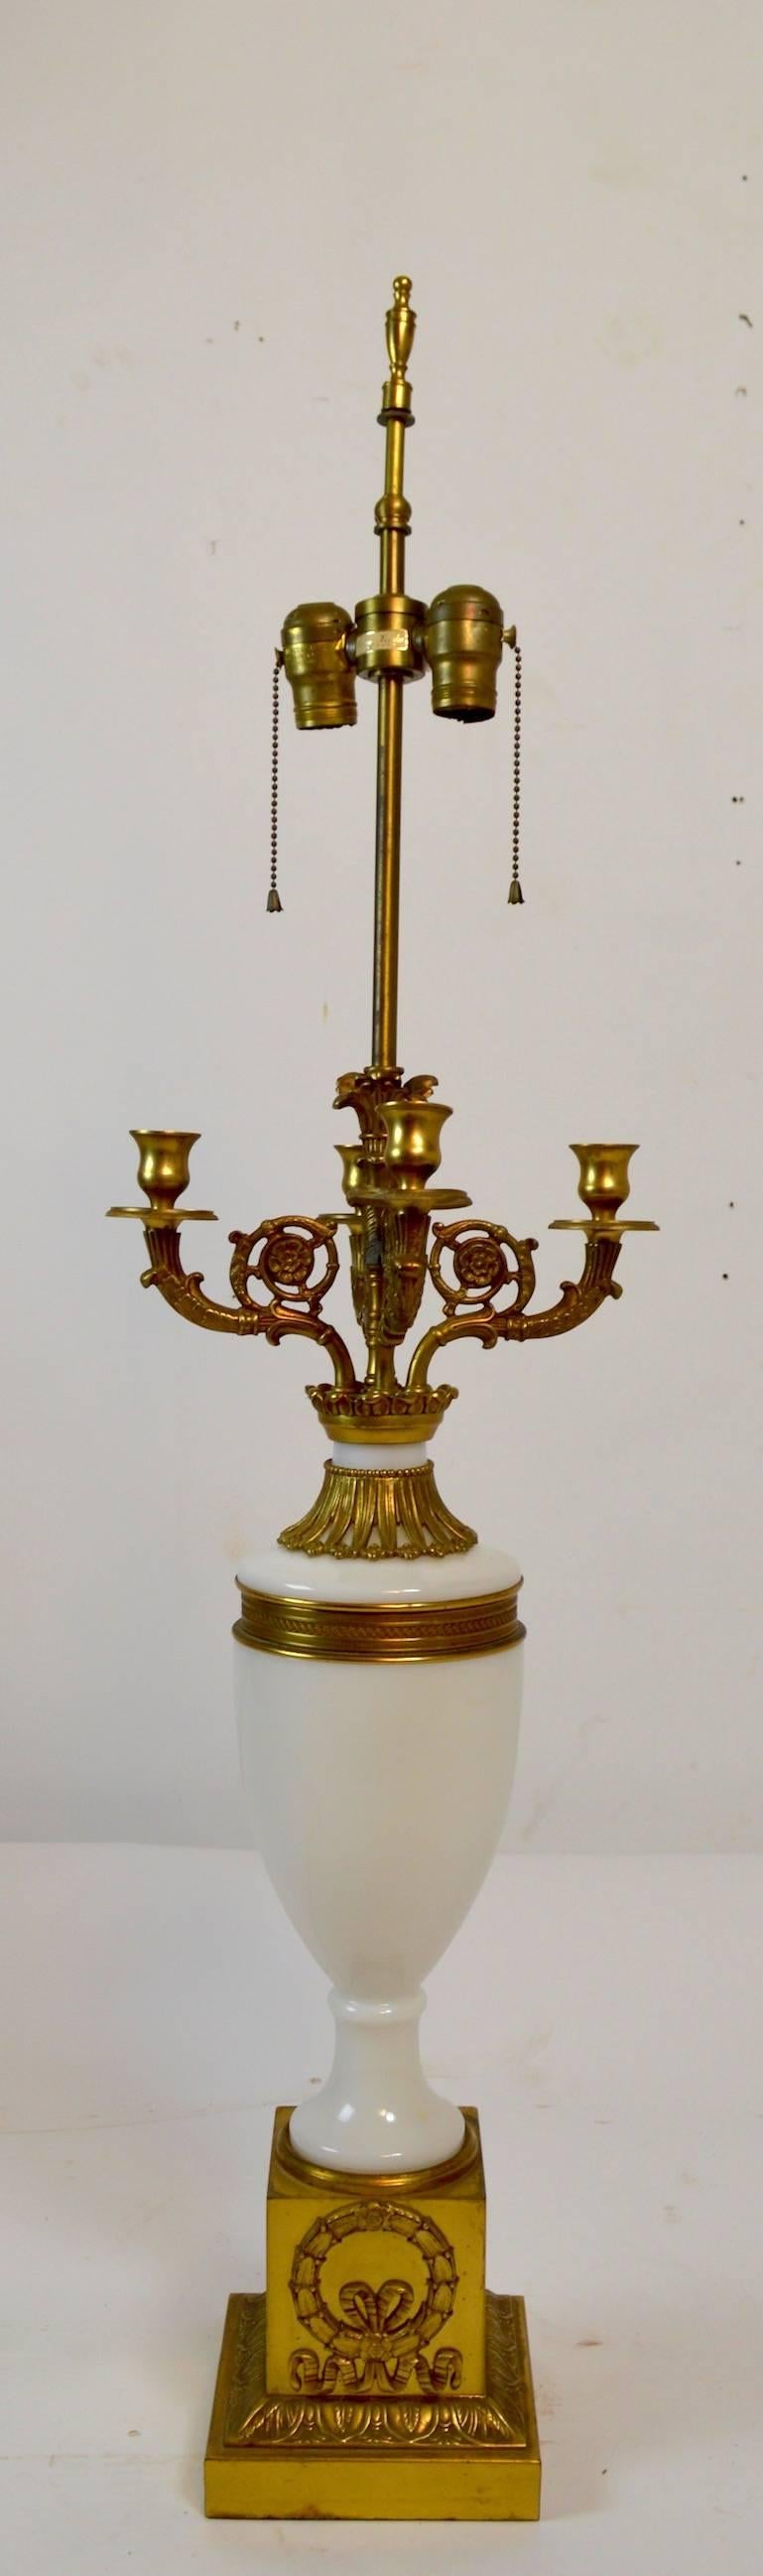 Pair of Classic Revival lamps by Warren Kessler, each having brass candelabra tops, brass mounts, and base. Both are in very fine, original, and working condition.